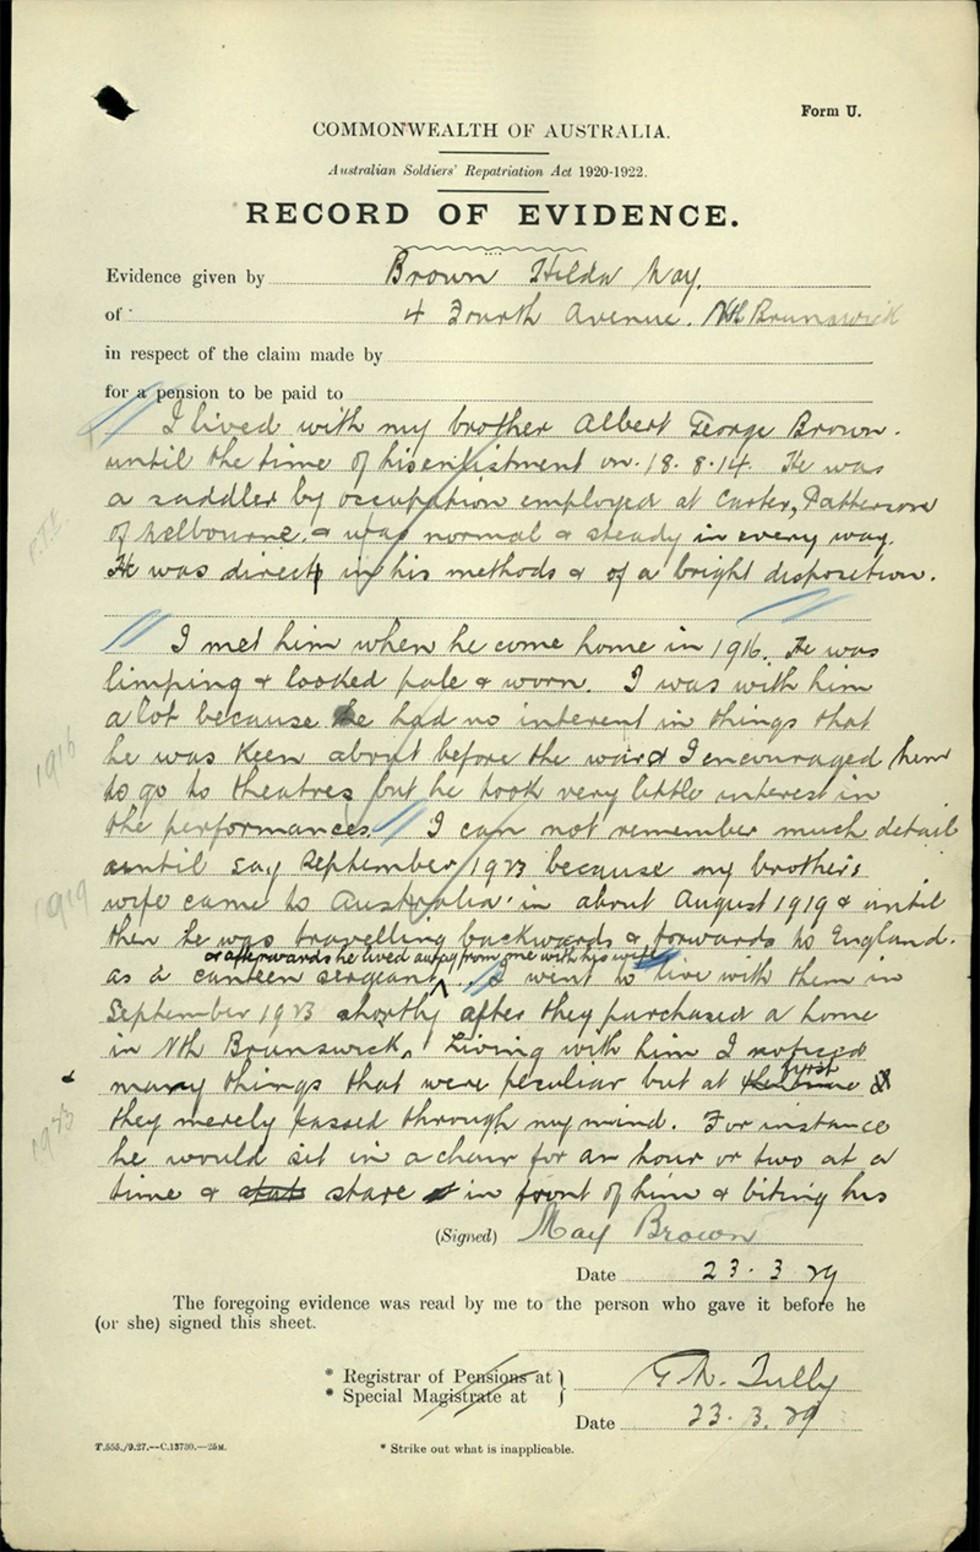 Record of evidence for Repatriation Department, confirming May Brown is caring for her husband, returned soldier.